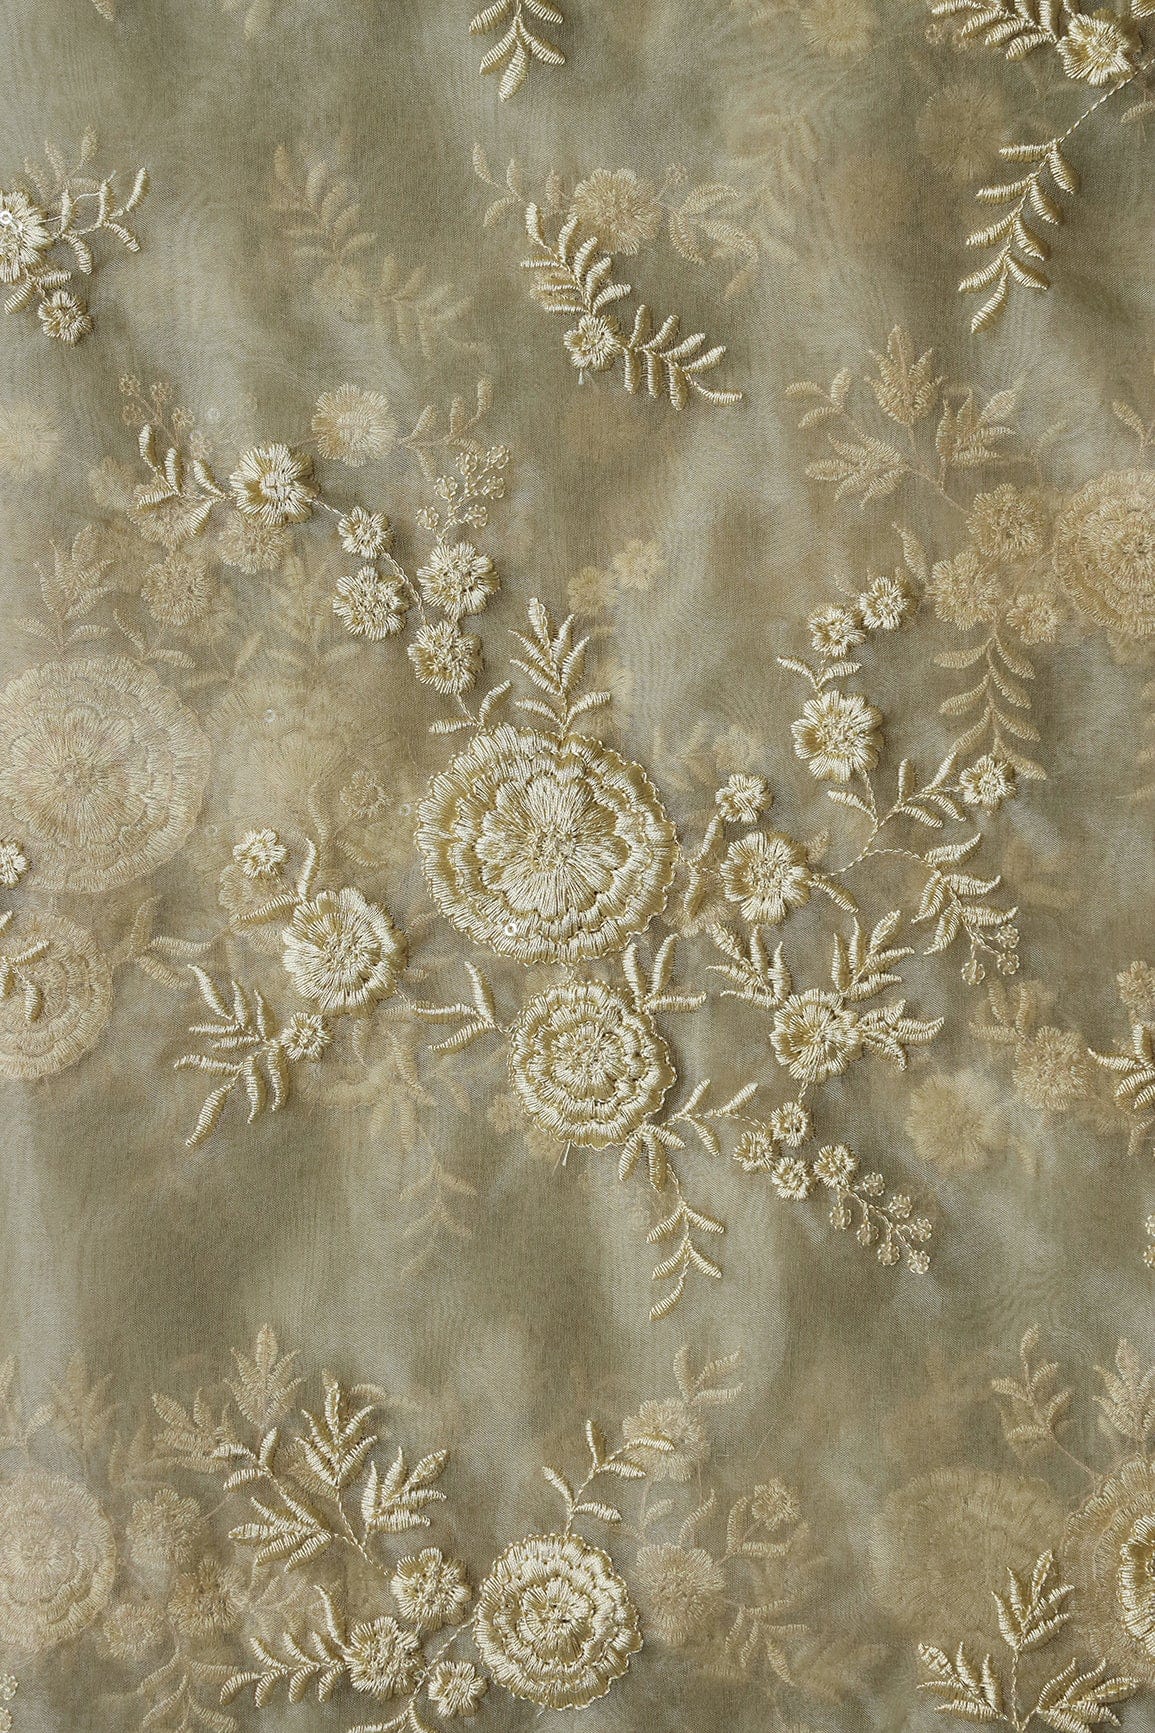 doeraa Embroidery Fabrics Beige Thread With Water Sequins Floral Embroidery Work On Beige Organza Fabric